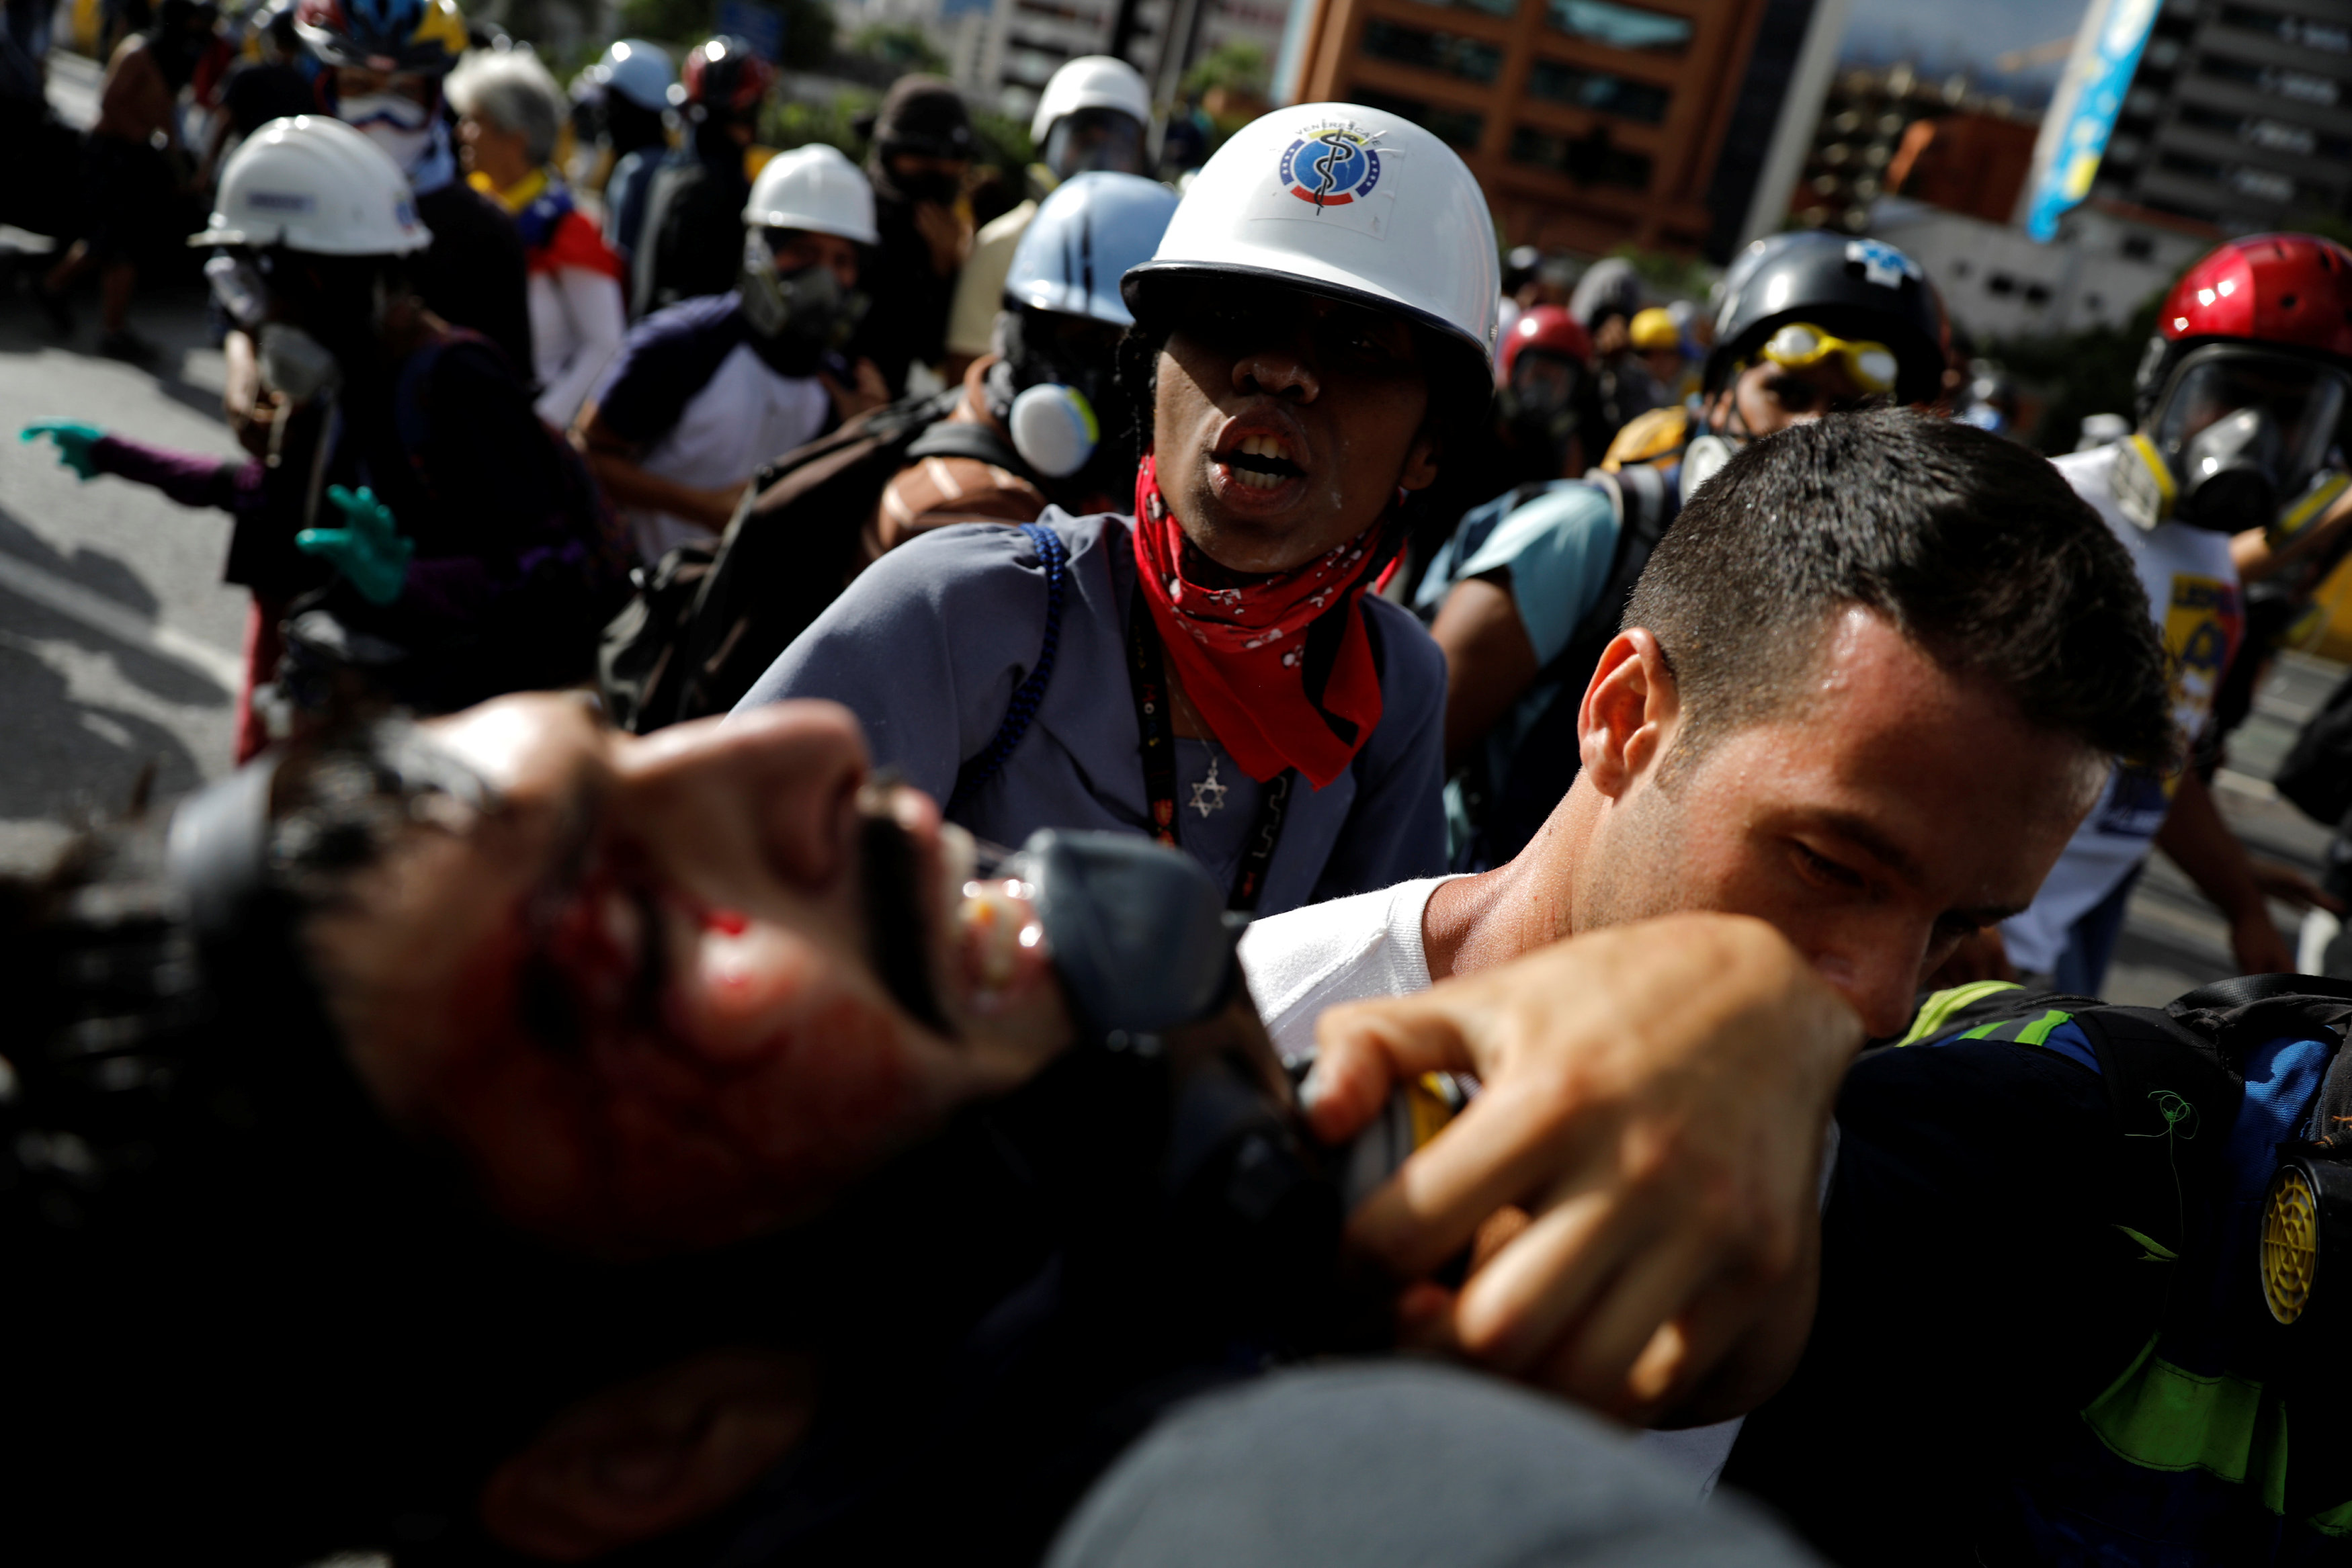 ATTENTION EDITORS - VISUALS COVERAGE OF SCENES OF DEATH OR INJURY A person reacts as an injured demonstrator is helped by others during a rally against Venezuela's President Nicolas Maduro in Caracas, Venezuela, June 10, 2017. REUTERS/Carlos Garcia Rawlins